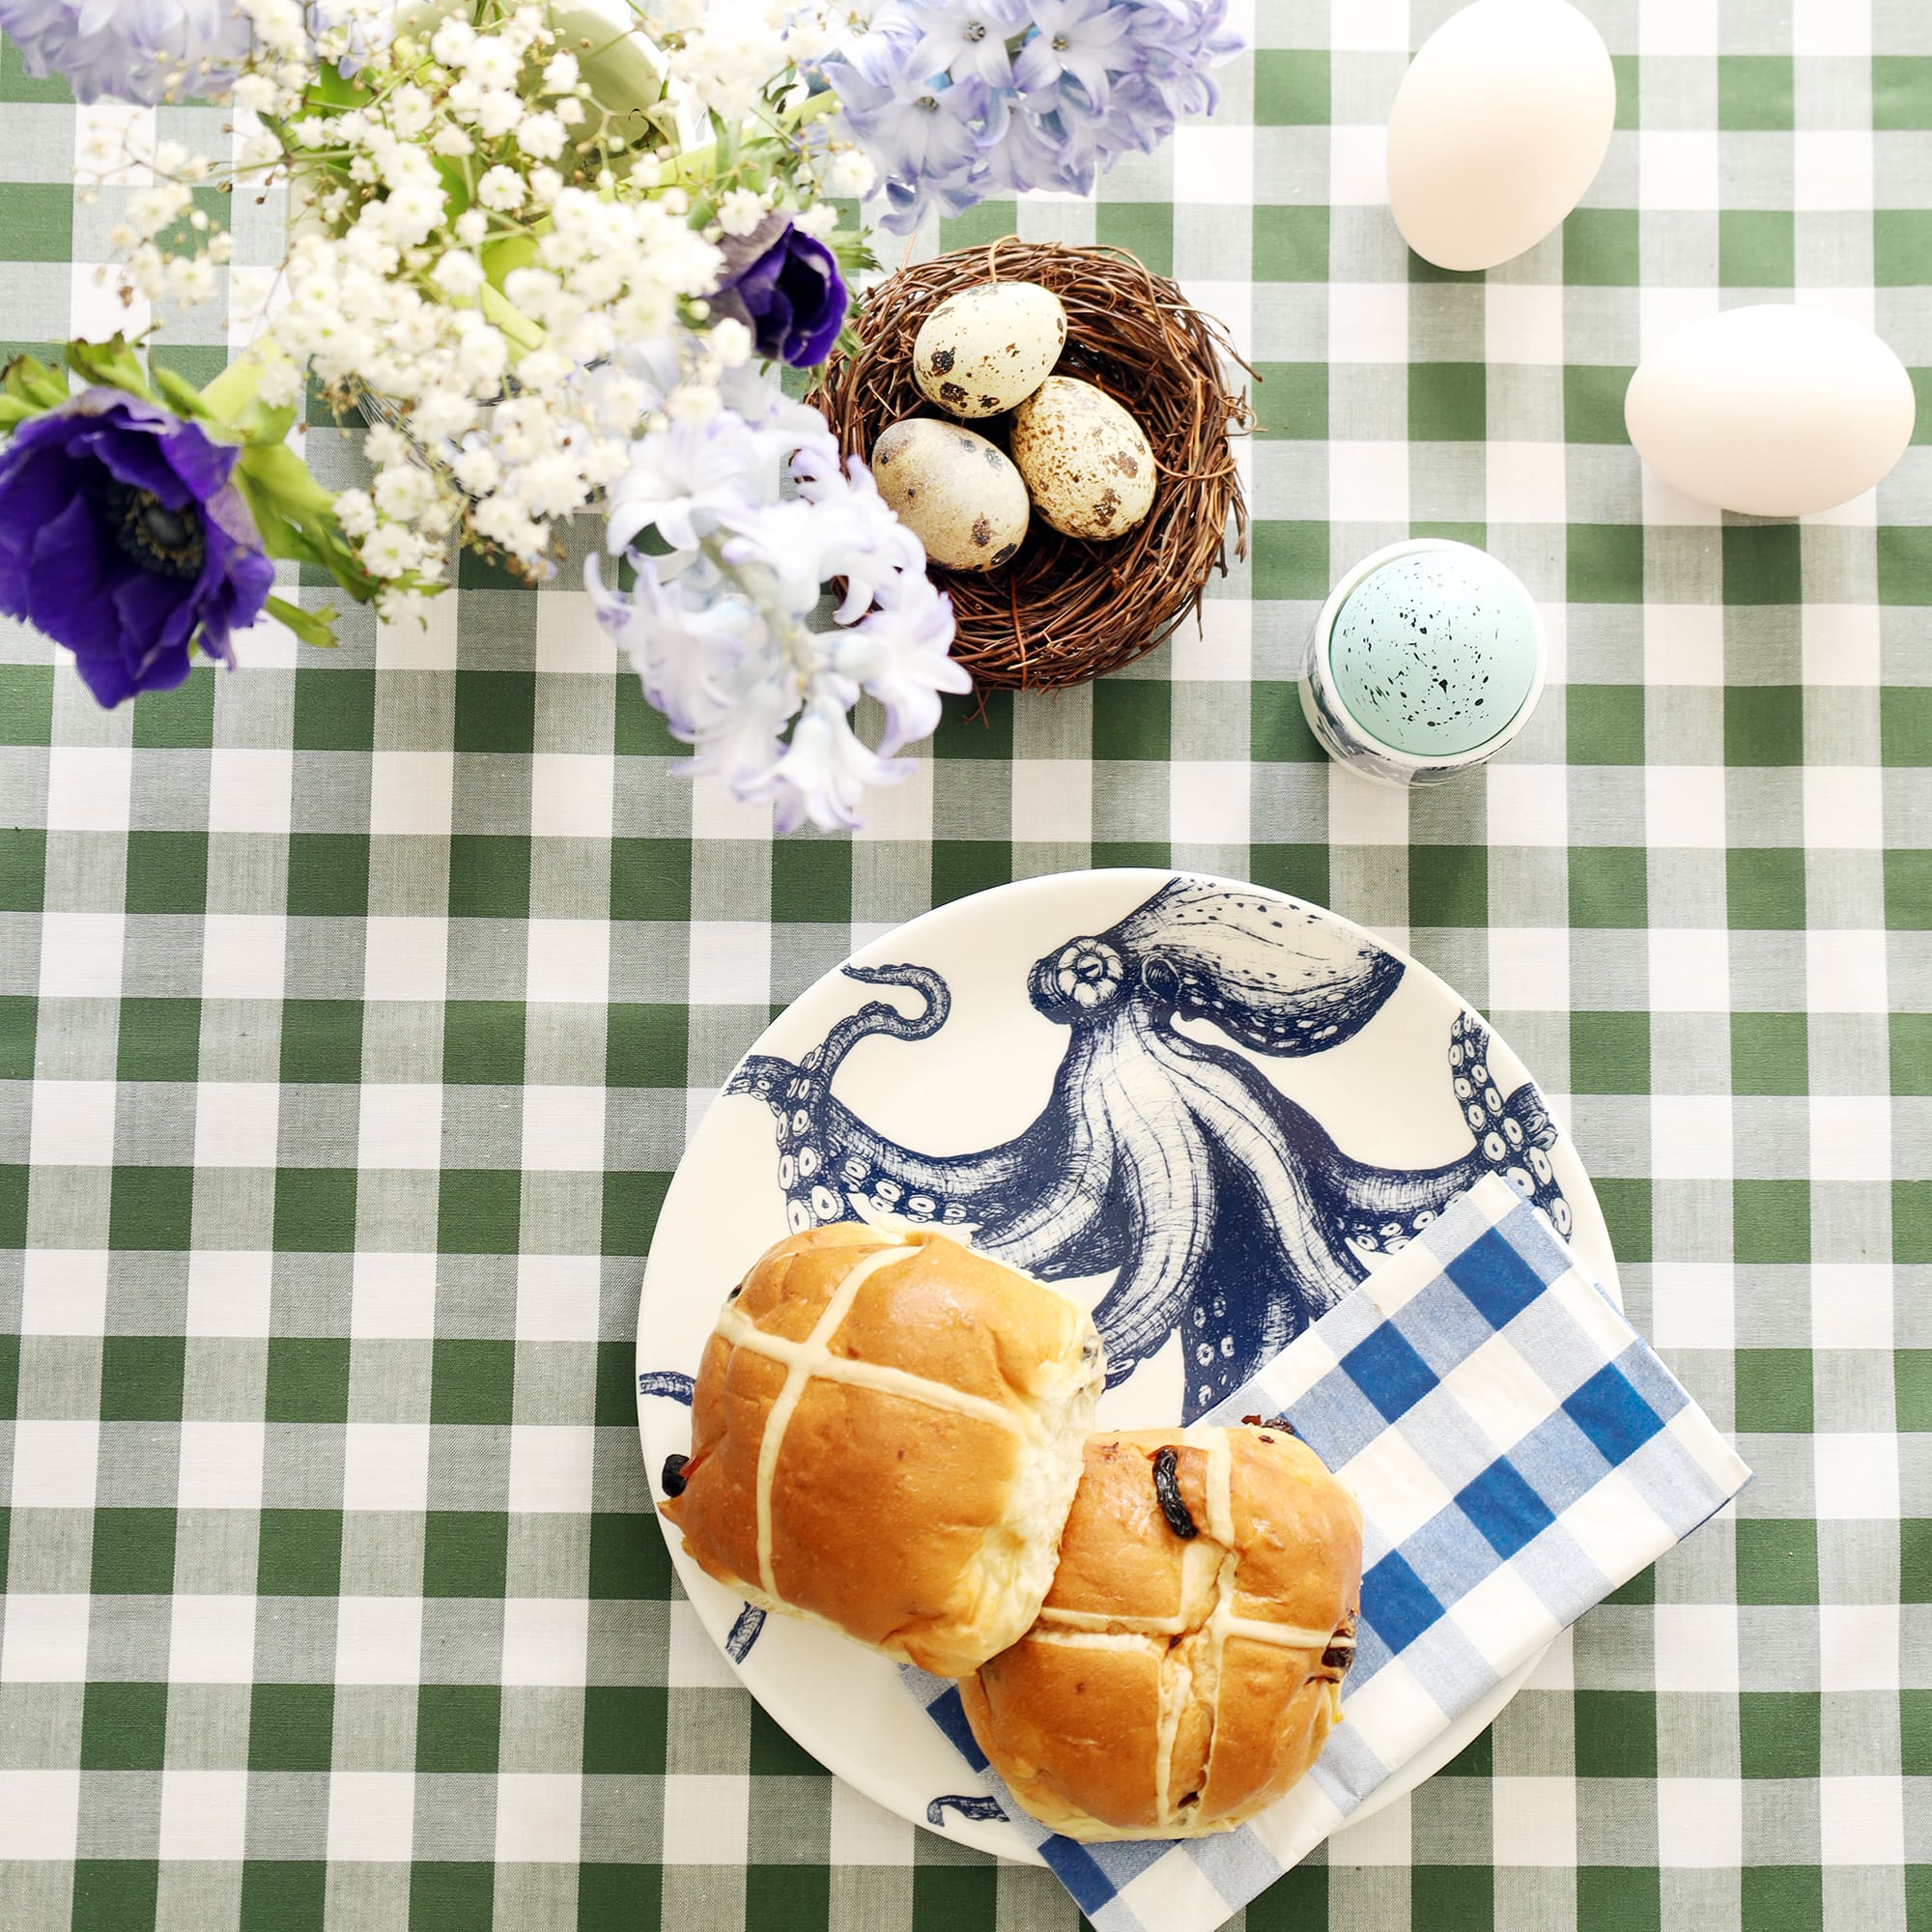 White plate with navy octopus illustration it with 2 hot cross buns and a blue checked napkin. There are flowers and eggs decorating the green checked tablecloth.